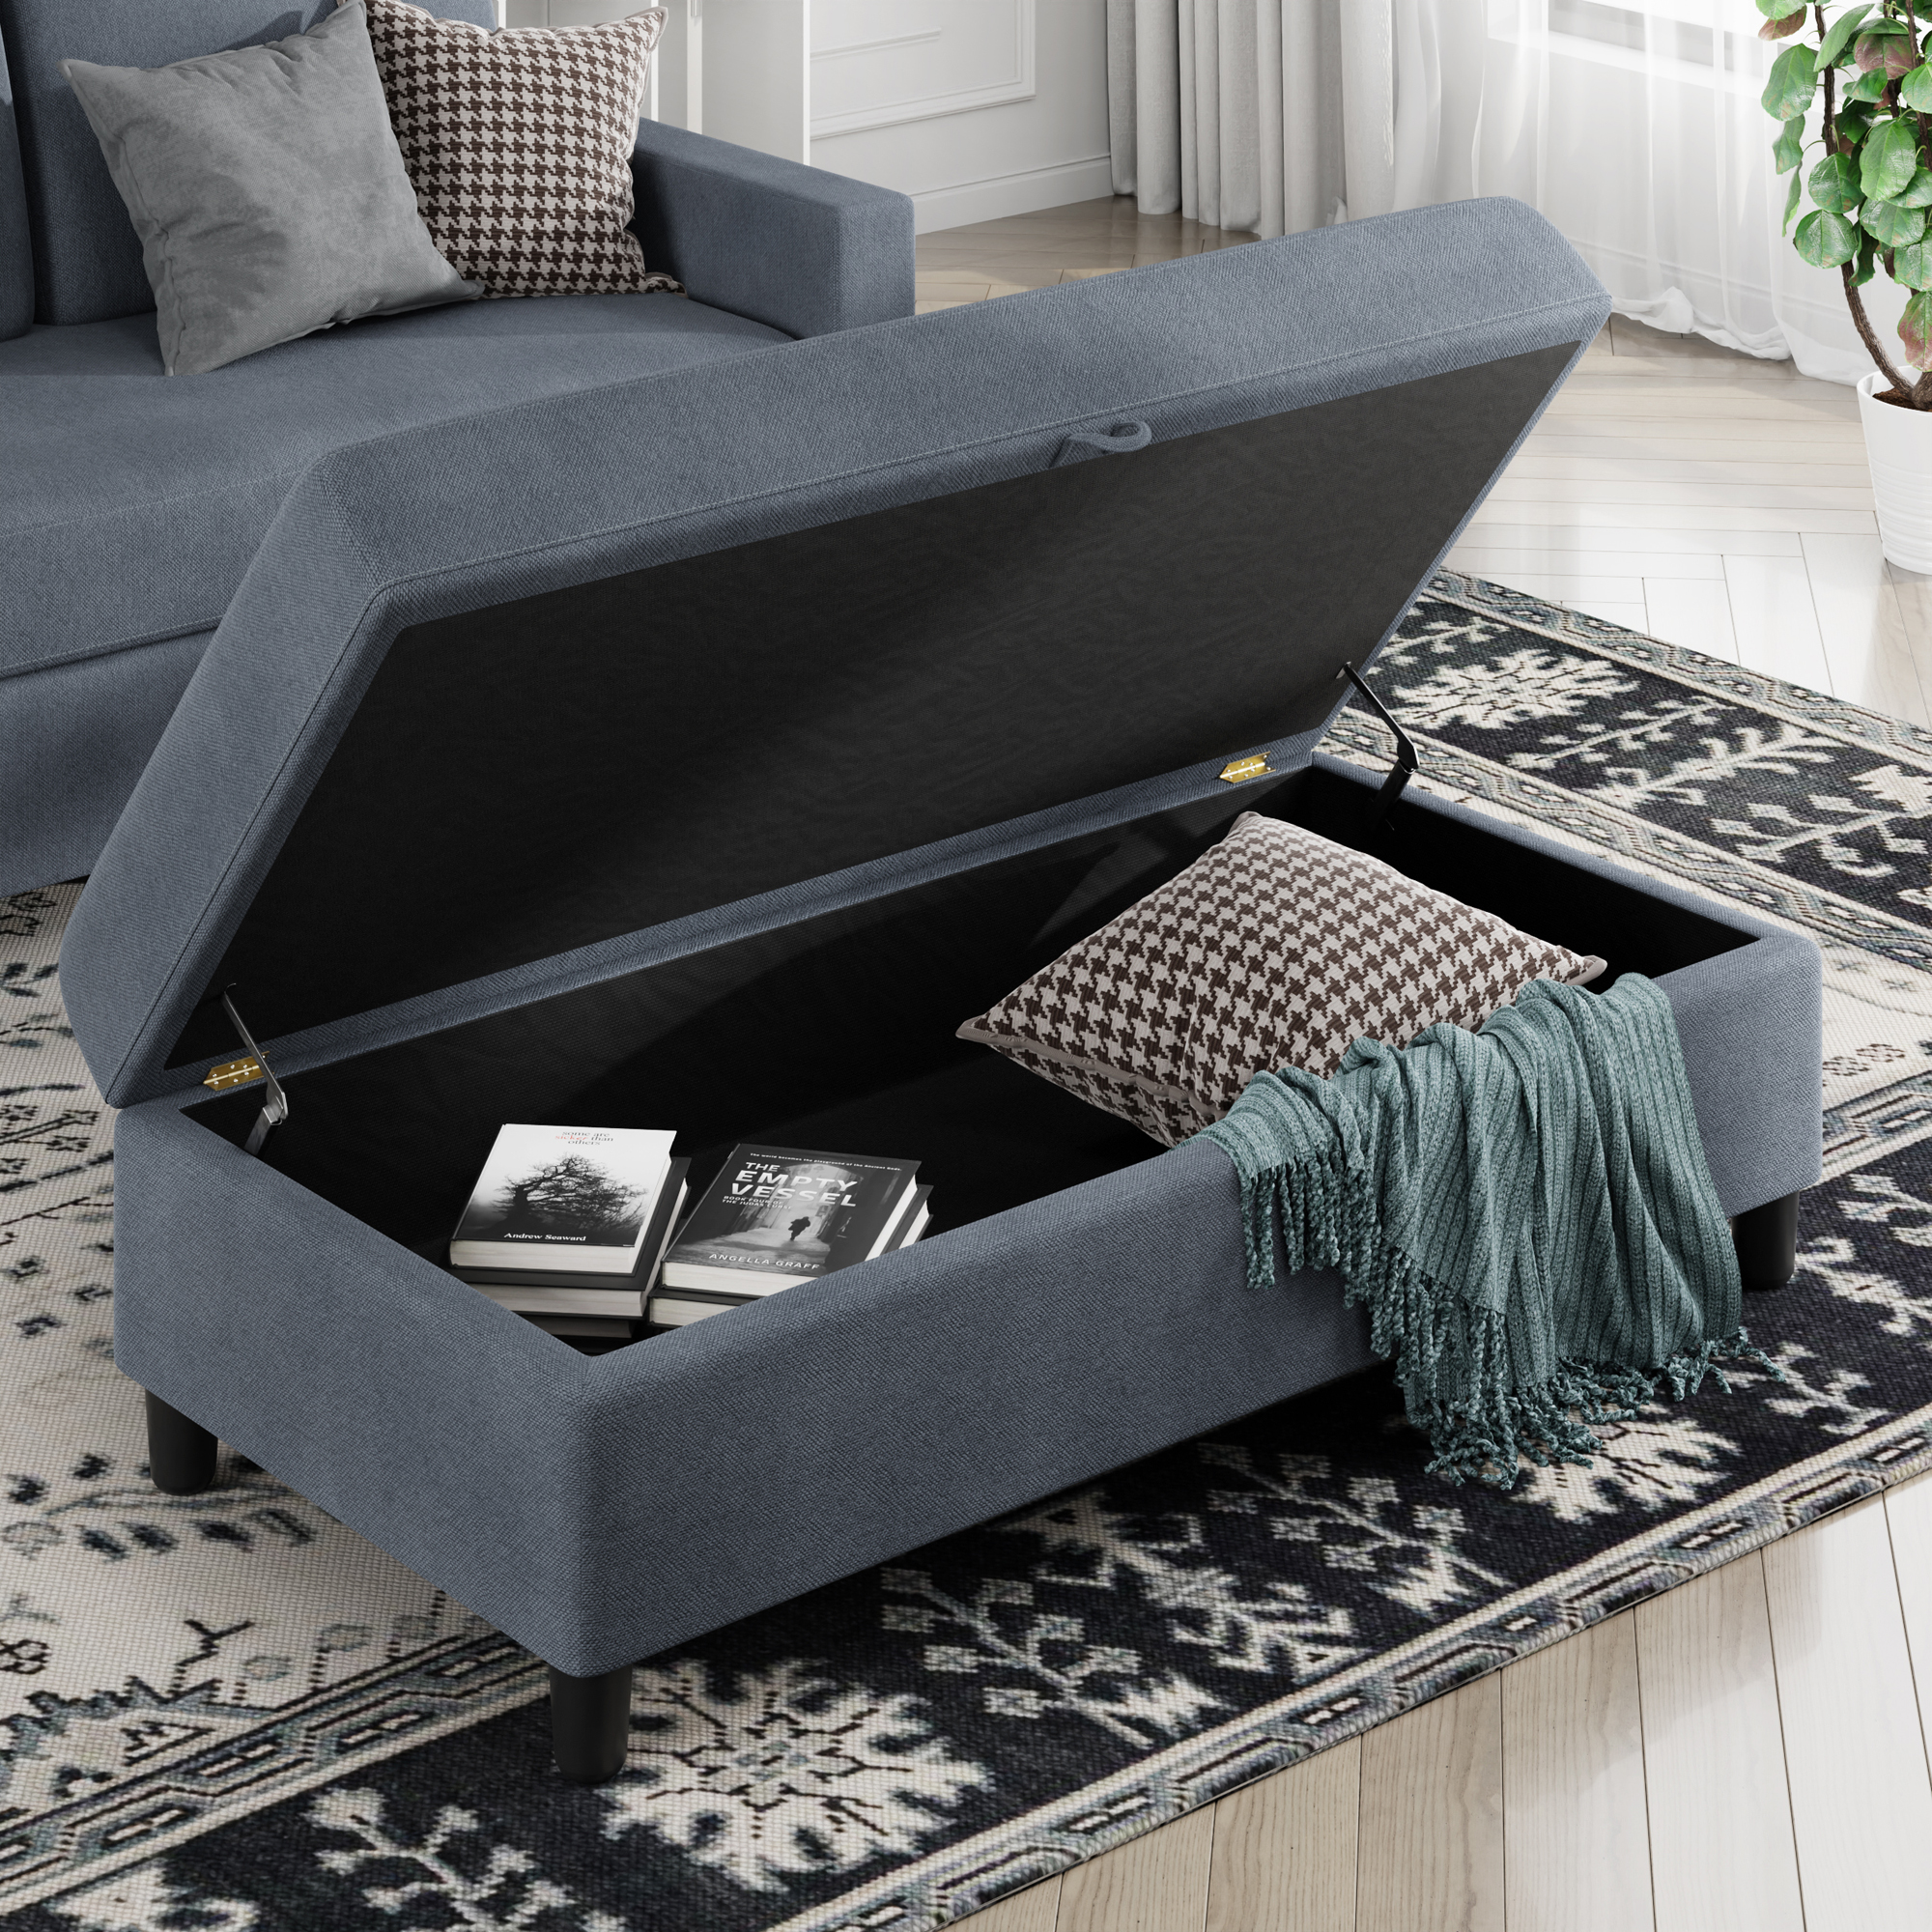 Walsunny Sectional Sofa bed Linen Couch L Shaped 4 Seat with Storage Ottoman Dark Gray - image 3 of 7